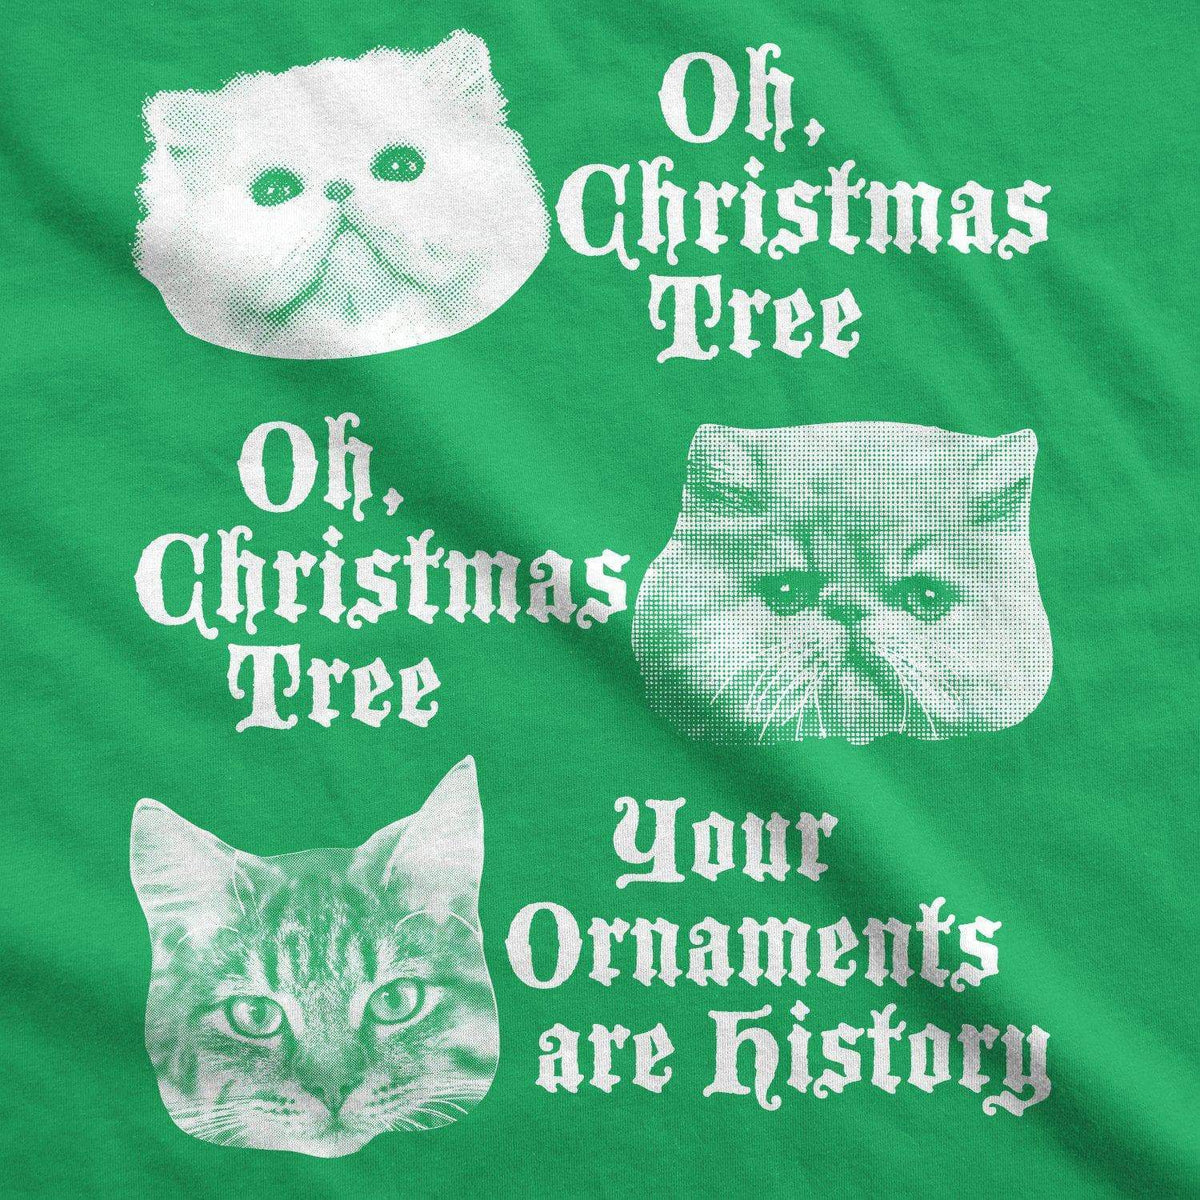 Oh Christmas Tree Your Ornaments Are History Men&#39;s Tshirt - Crazy Dog T-Shirts